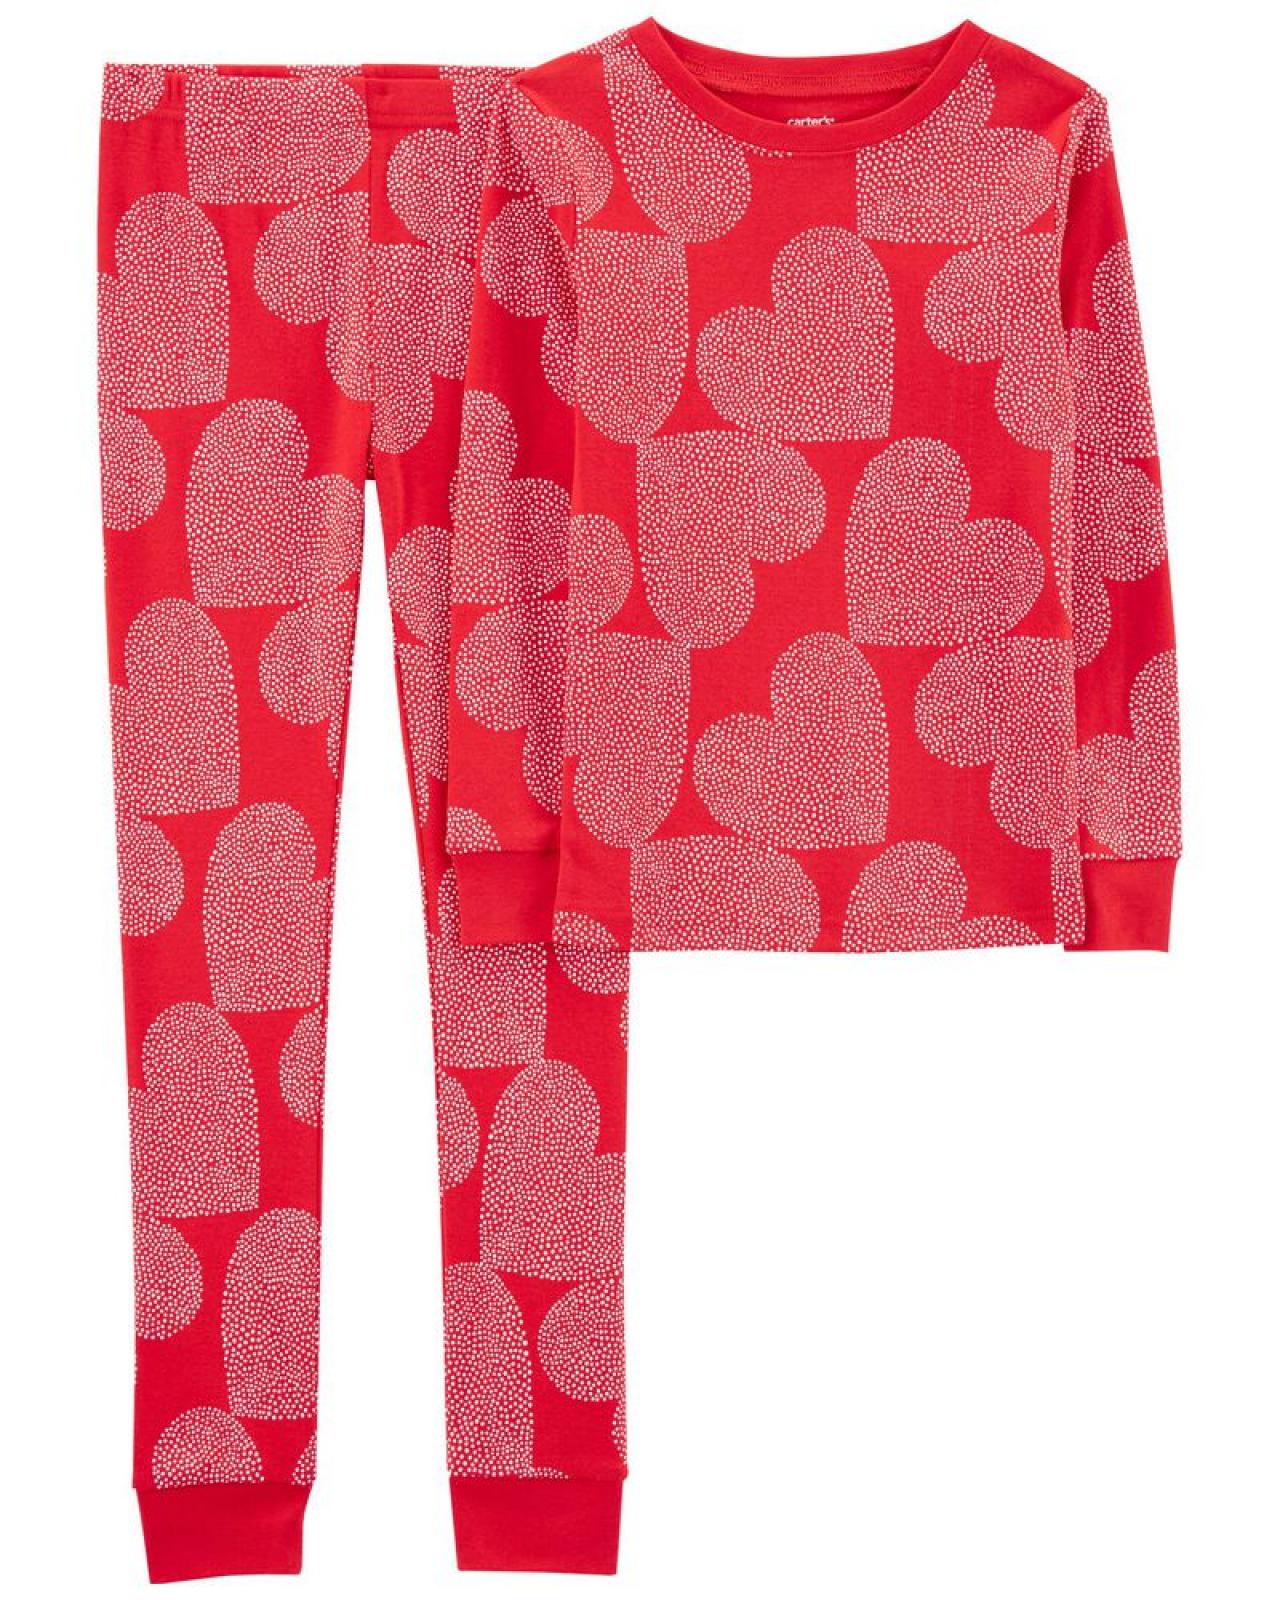 Matching Family Valentine's Day Pajamas — The Overwhelmed Mommy Blog